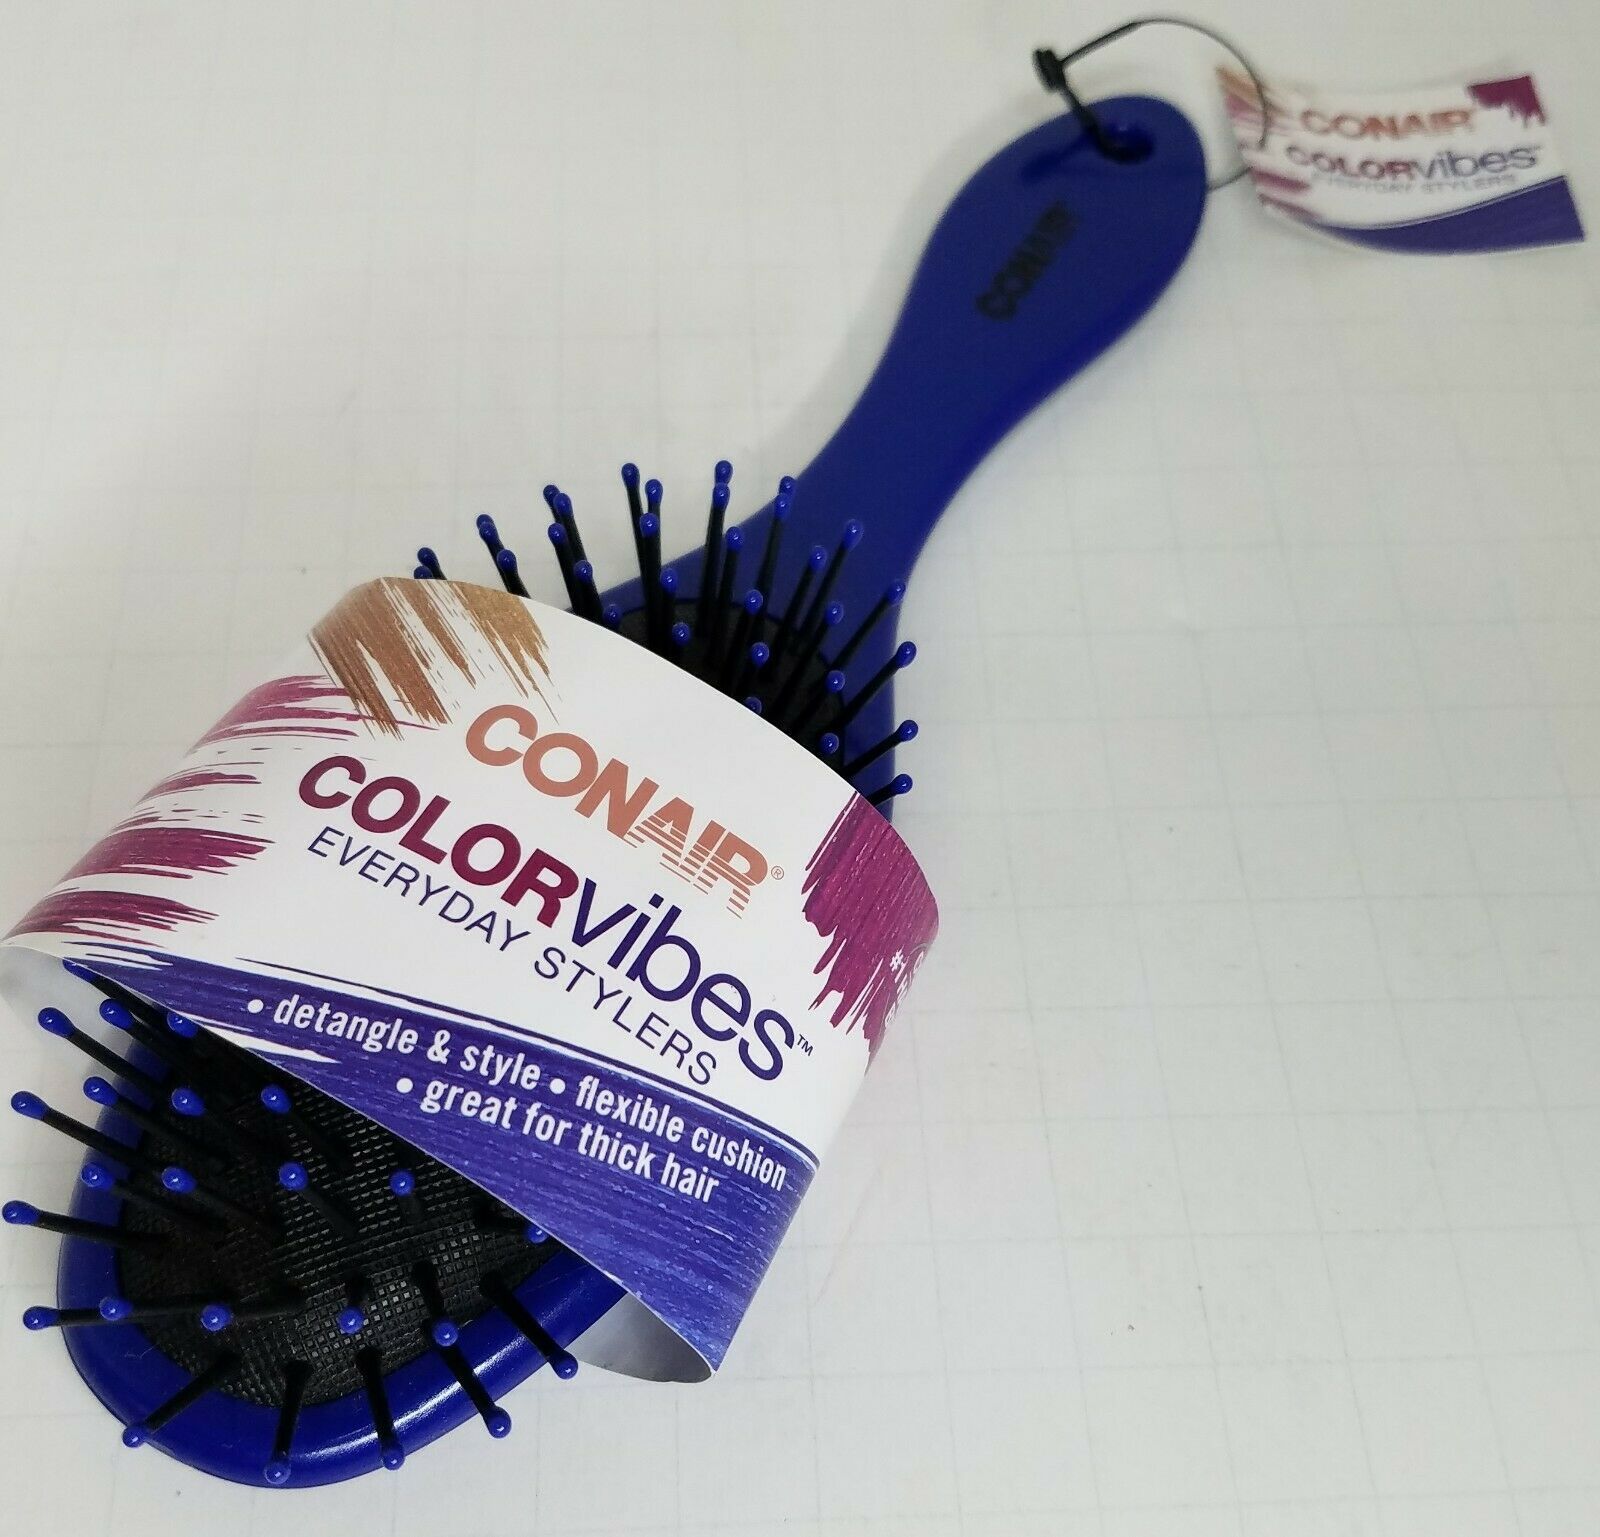 Primary image for Conair Colorvibes Everyday Stylers Hair Brush Assorted Colors